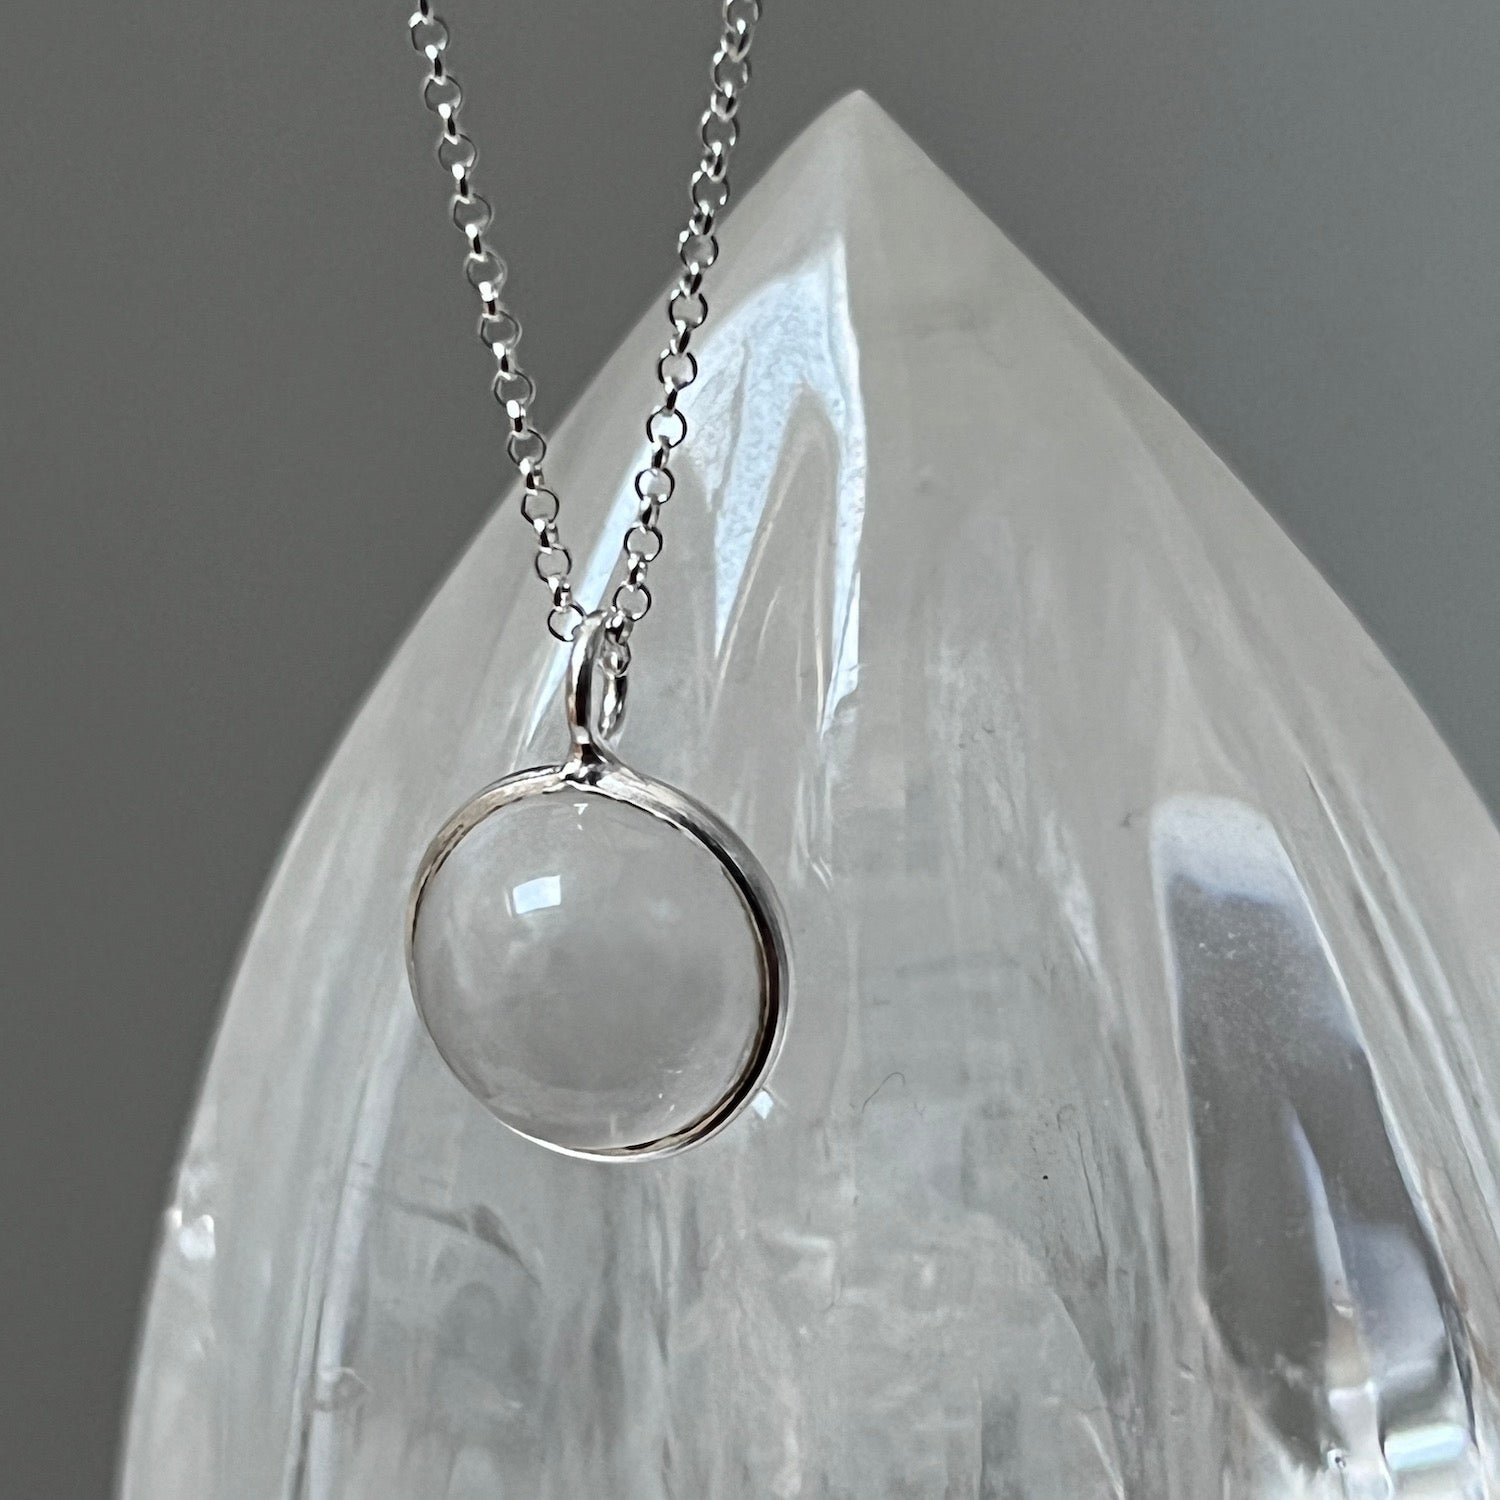 Magic Rock Crystal Ball in Sterling Silver on Sterling Silver Chain